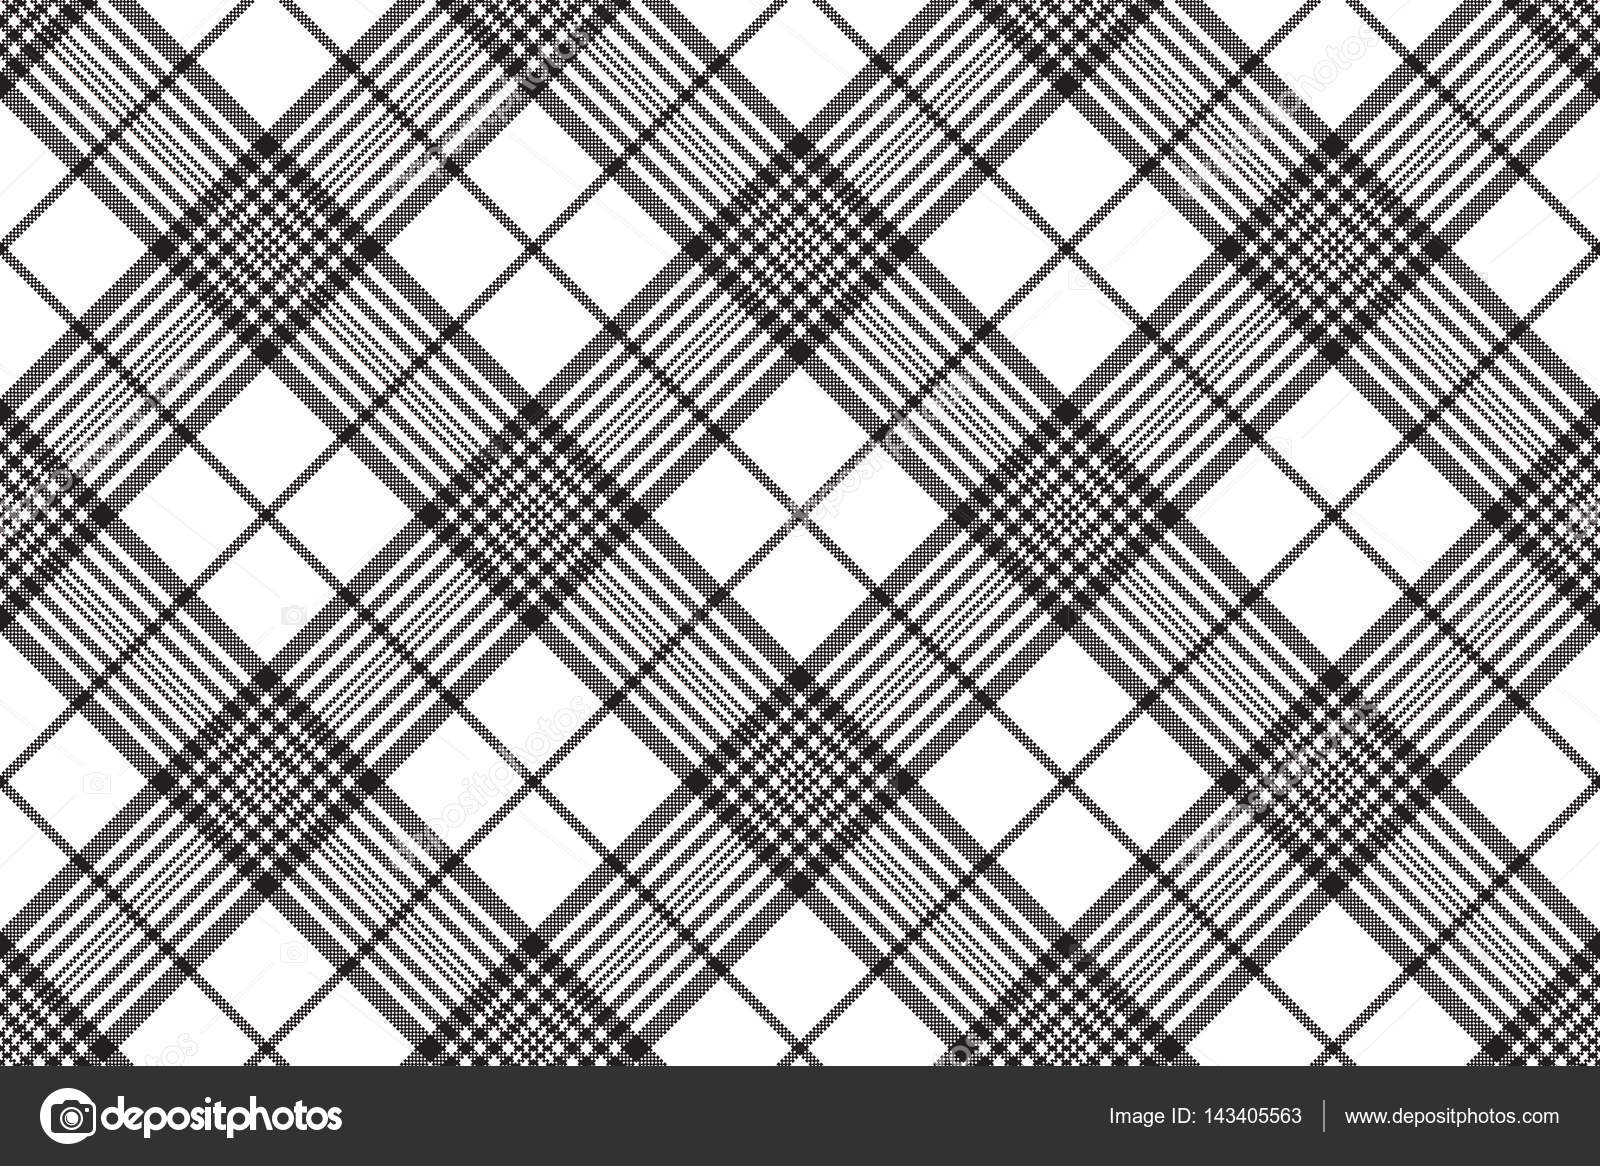 The best free Plaid drawing images. Download from 54 free drawings of